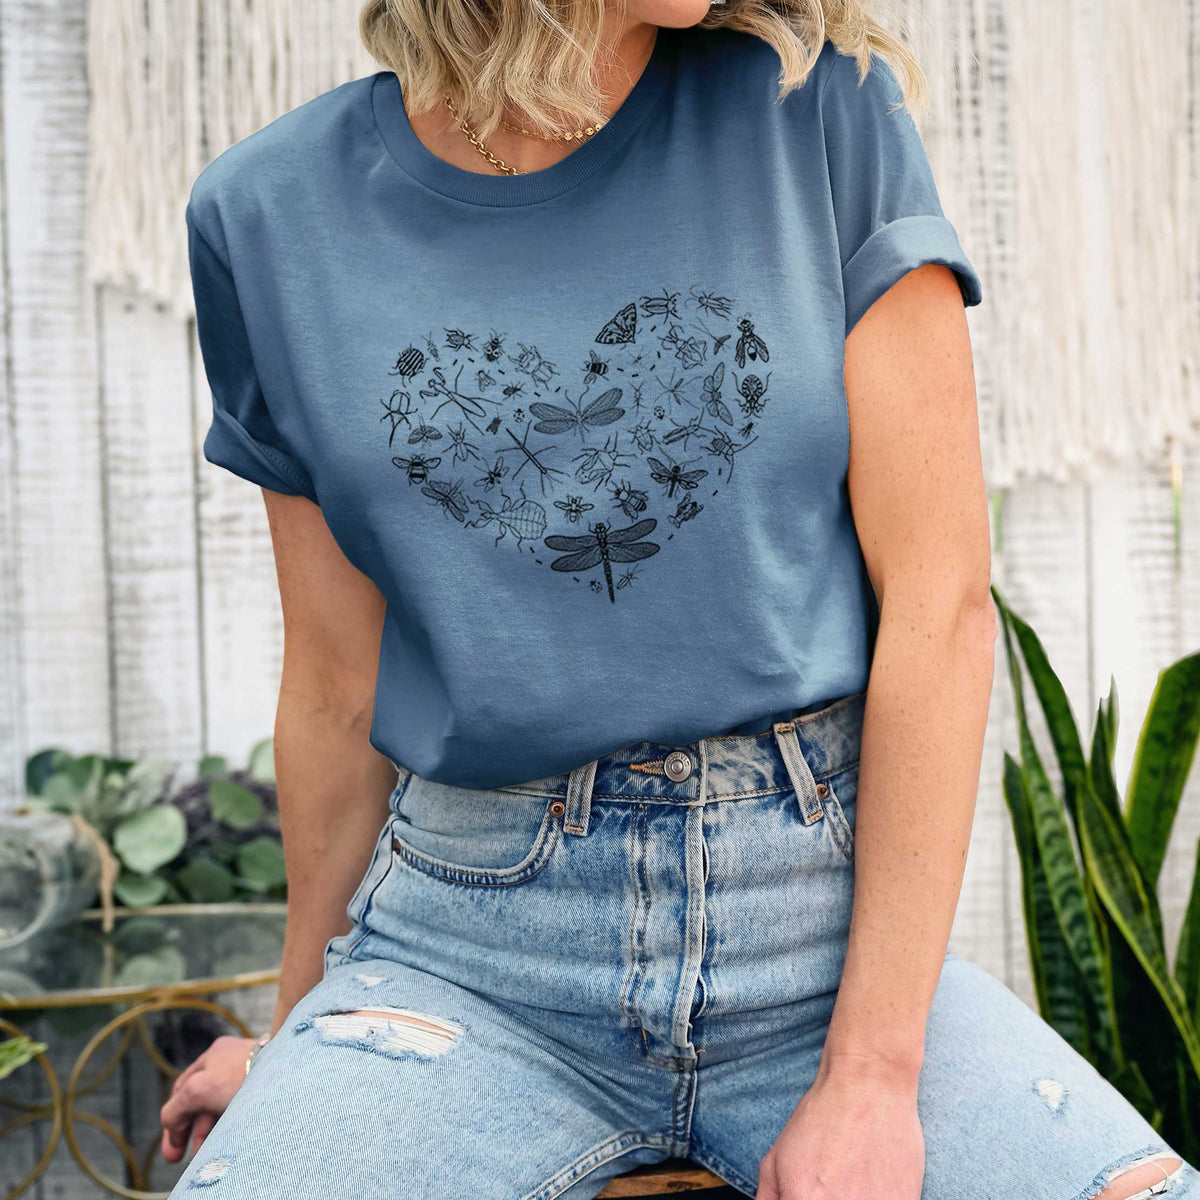 Heart Full of Insects - Lightweight 100% Cotton Unisex Crewneck